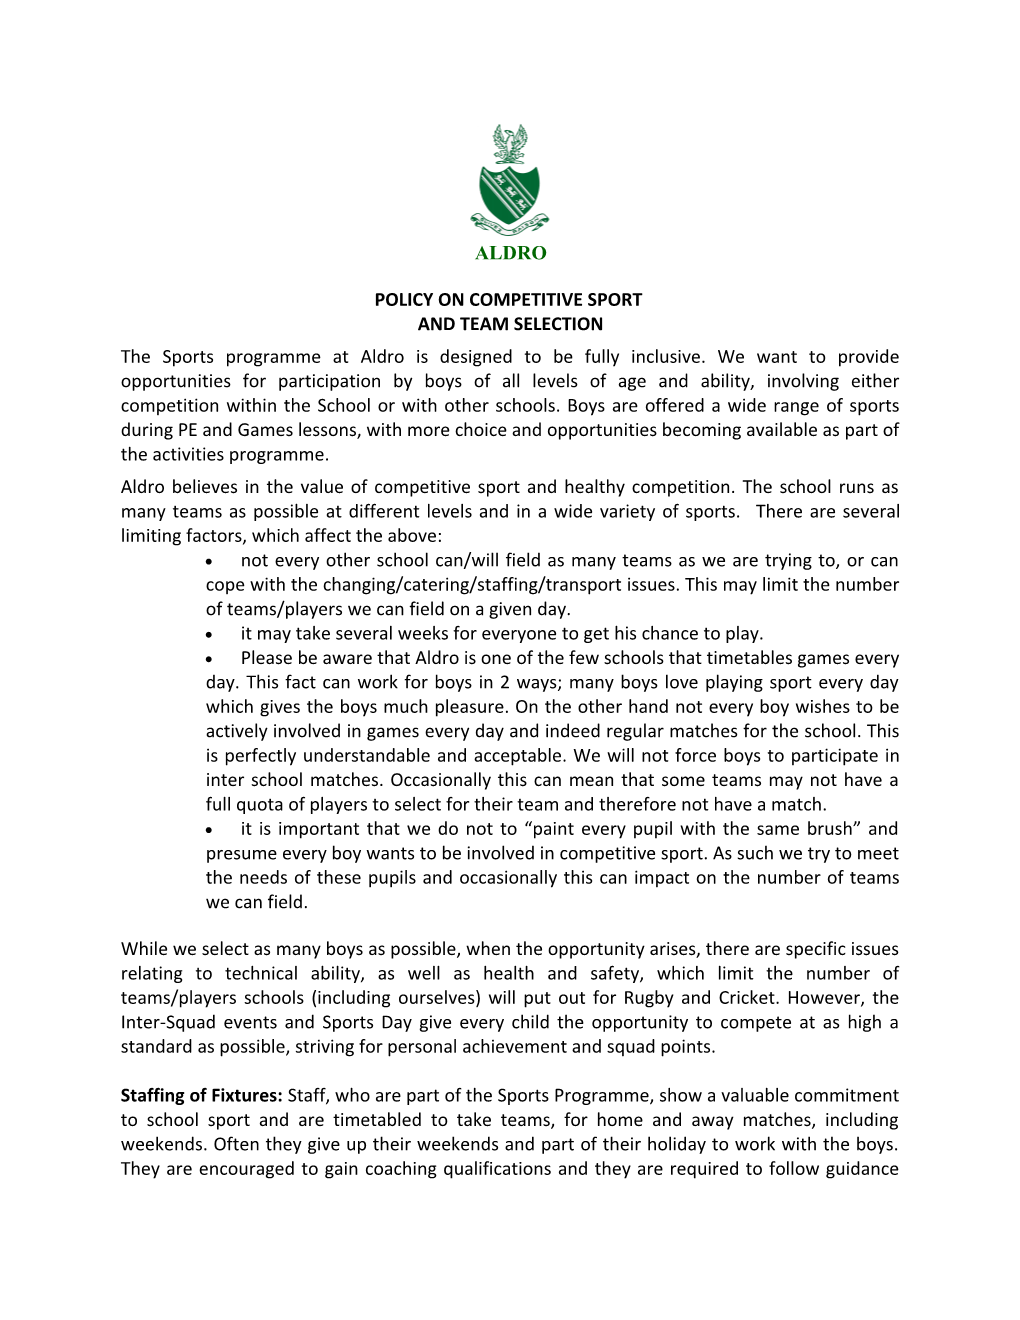 Policy on Competitive Sport